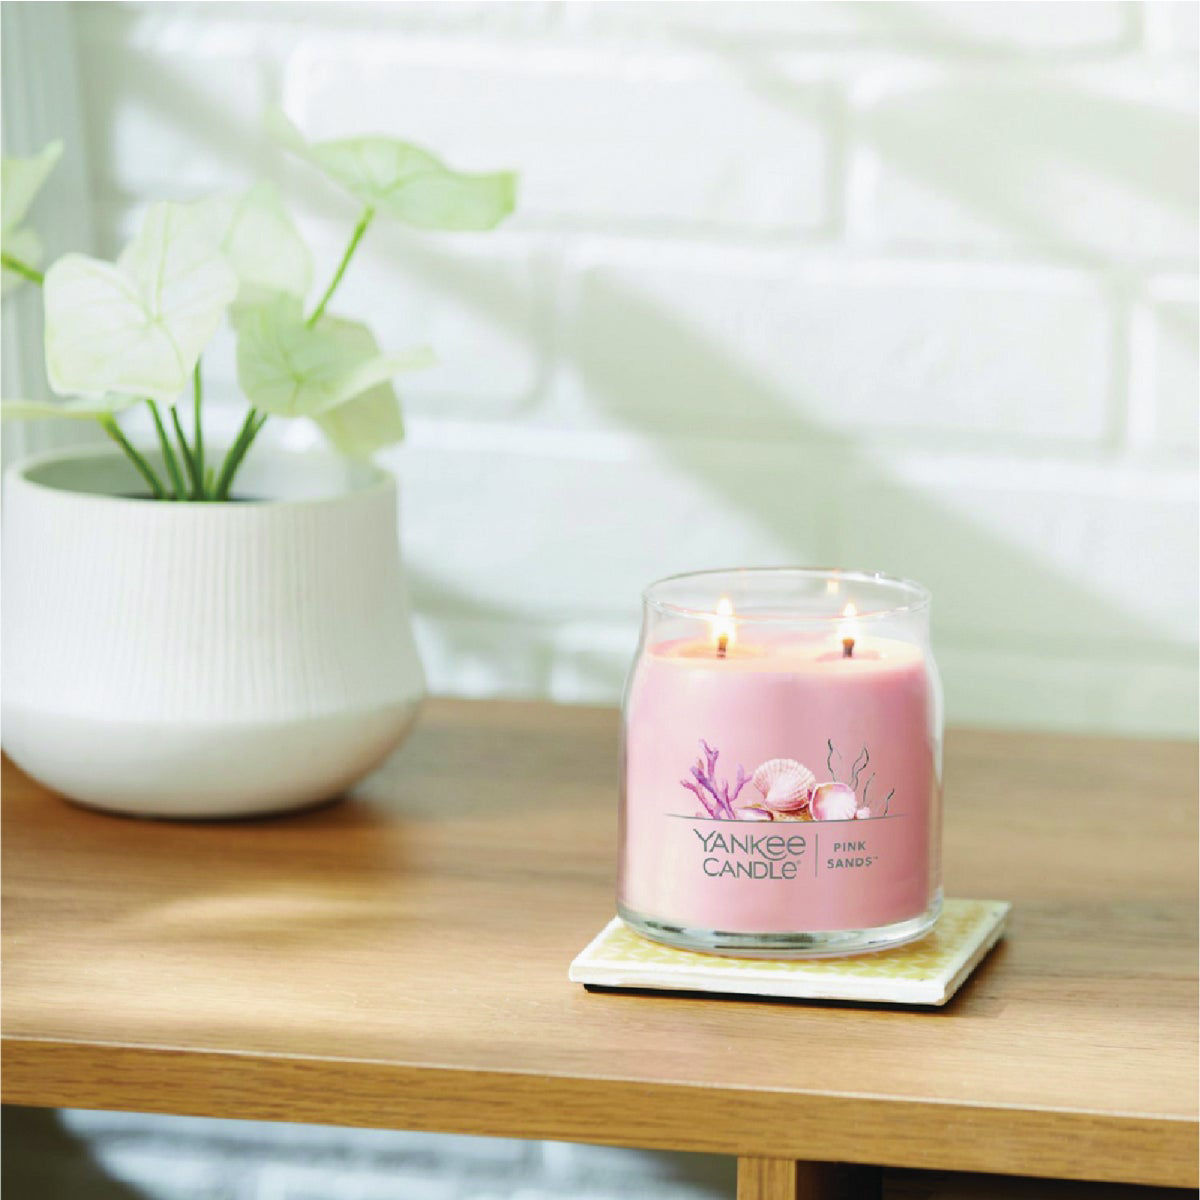 Yankee Candle Pink Sands Scented Candle (7 oz)